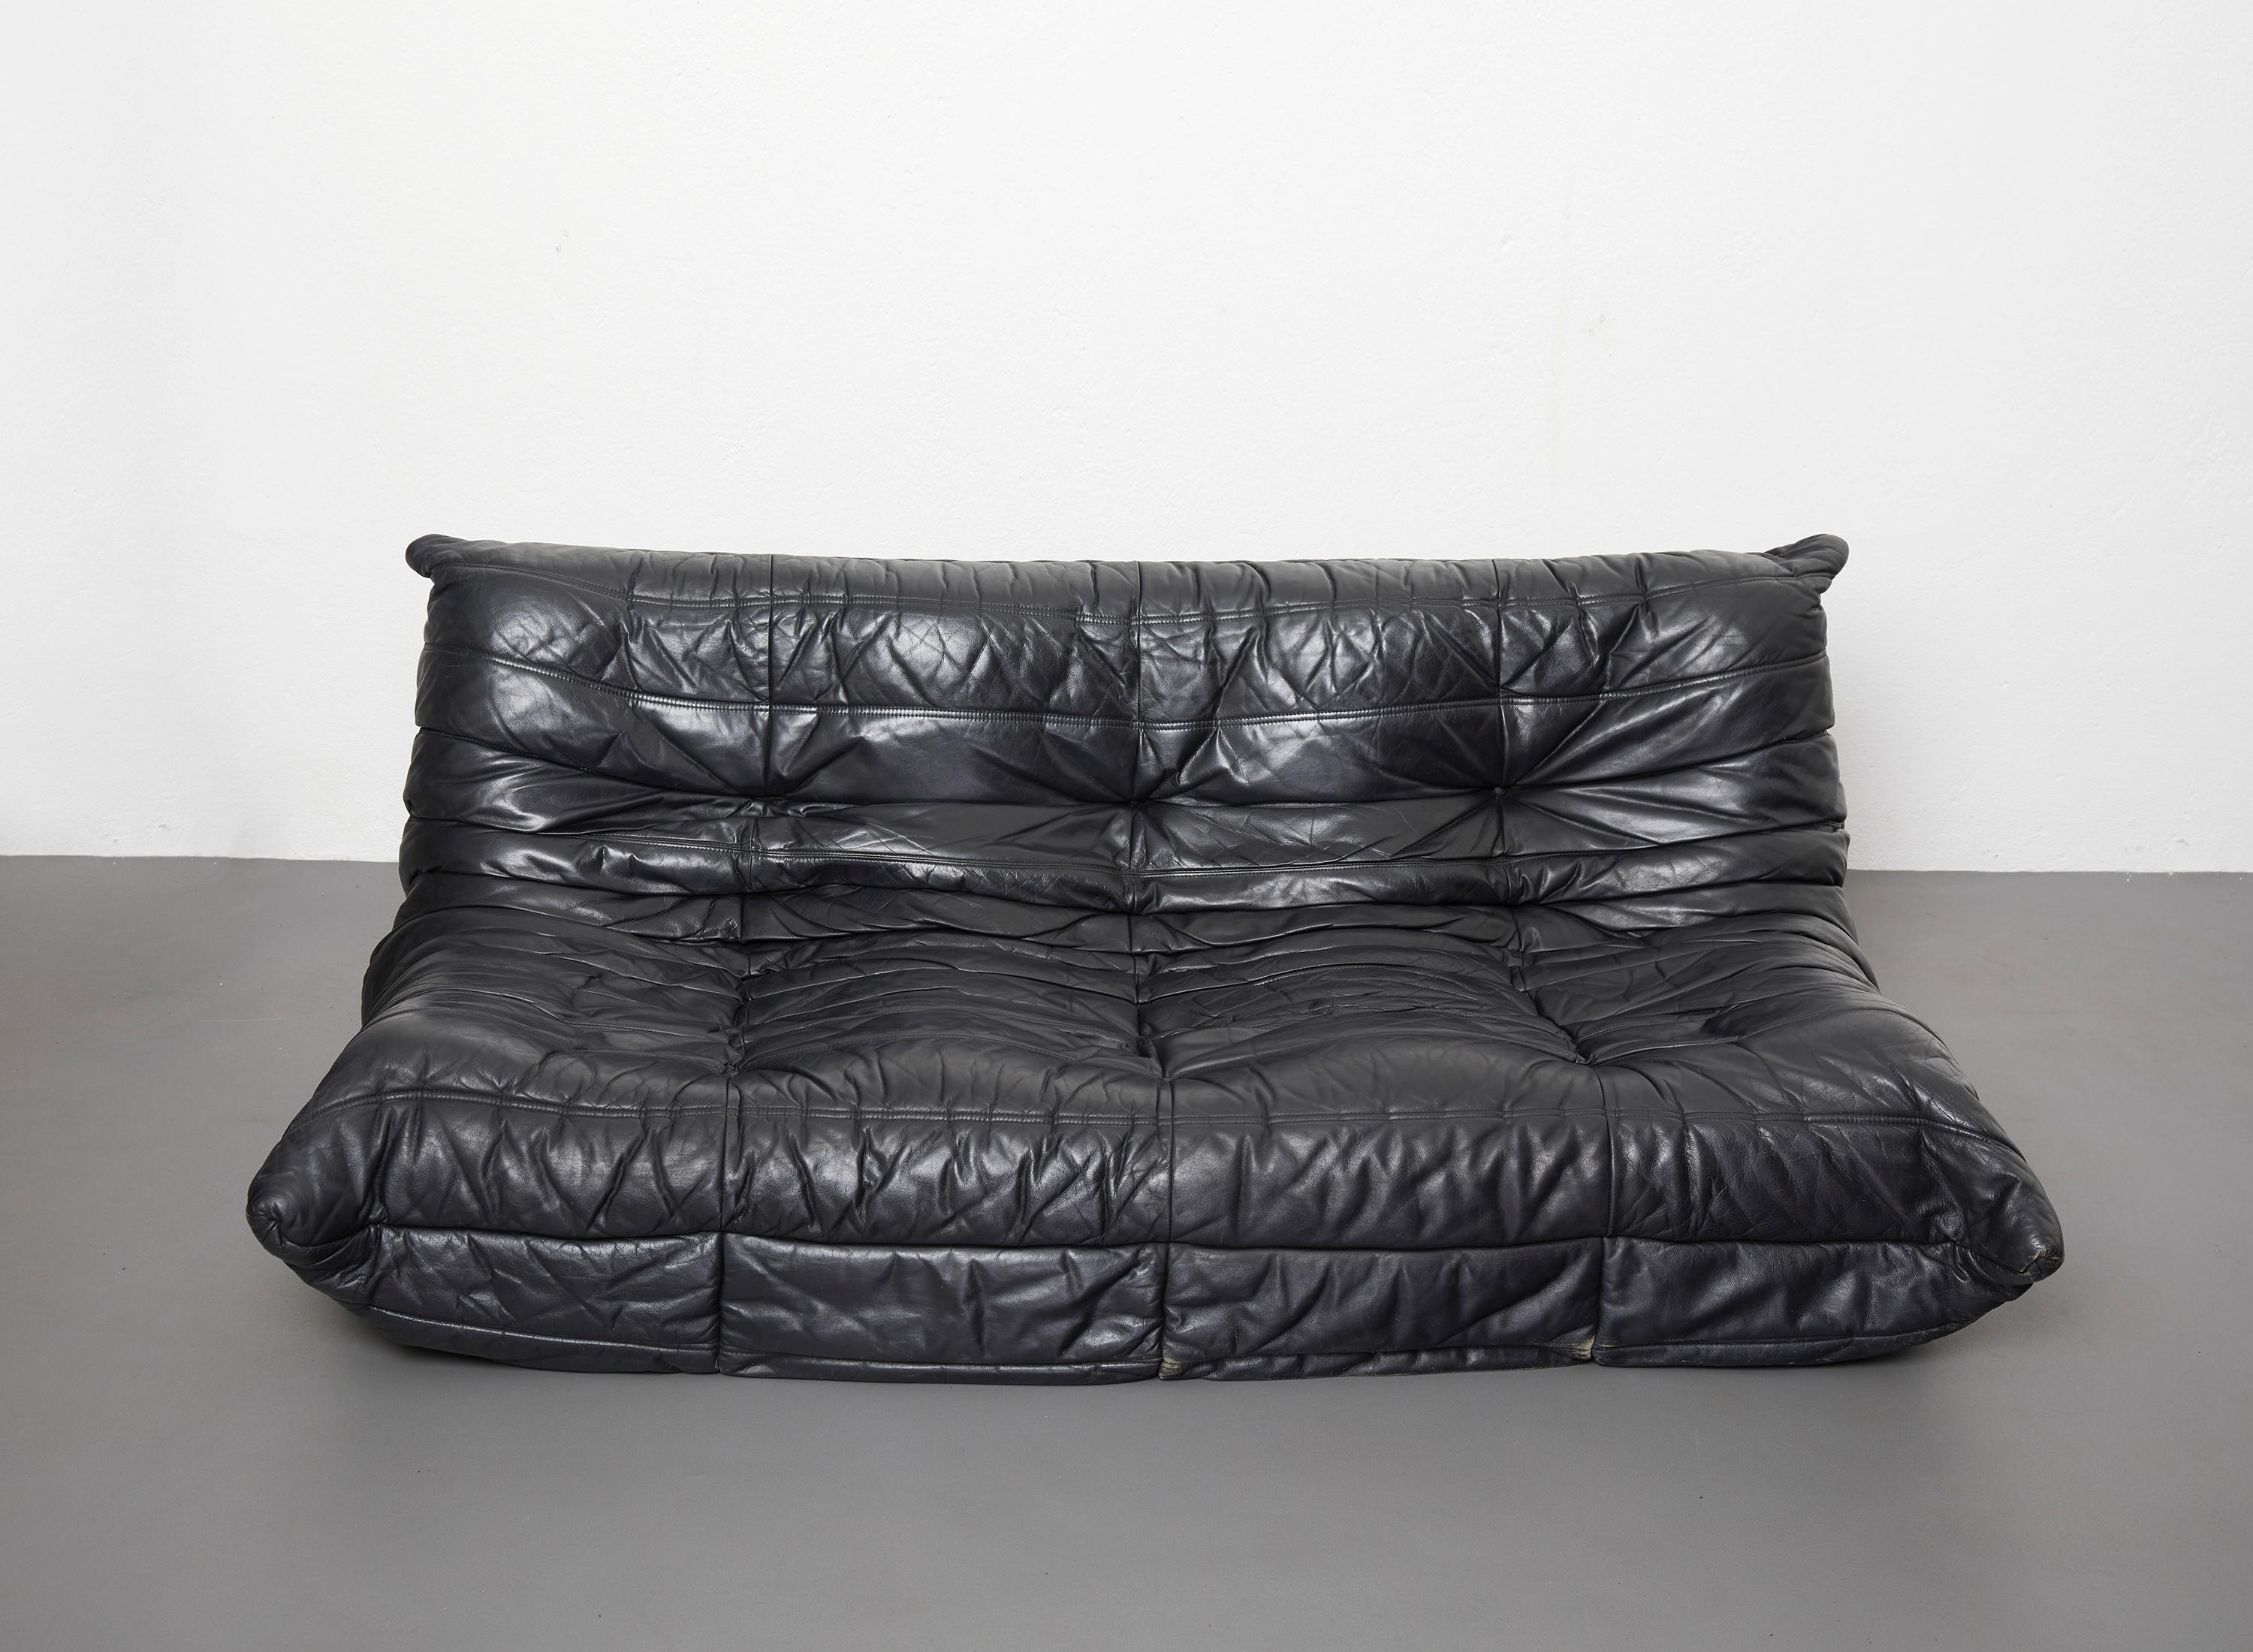 Black leather togo set, 2 and 3 seater, Michel Ducaroy by Ligne Roset 1973

Set of two iconic Ligne Roset Togo sofas: one three seater and one two seater. 
These sofa are known for their outstanding seating comfort

Beautiful black leather,